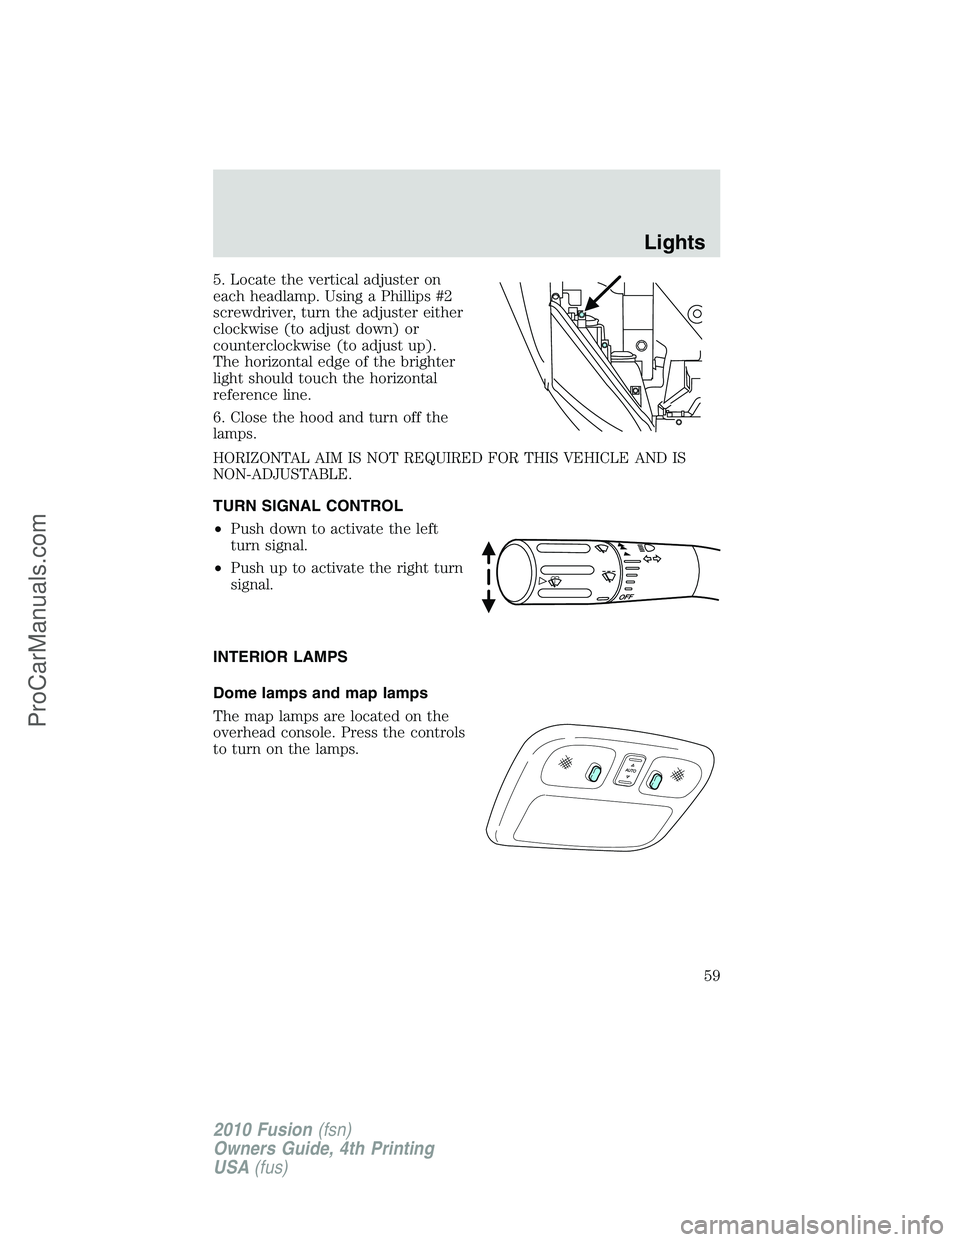 FORD FUSION 2010  Owners Manual 5. Locate the vertical adjuster on
each headlamp. Using a Phillips #2
screwdriver, turn the adjuster either
clockwise (to adjust down) or
counterclockwise (to adjust up).
The horizontal edge of the br